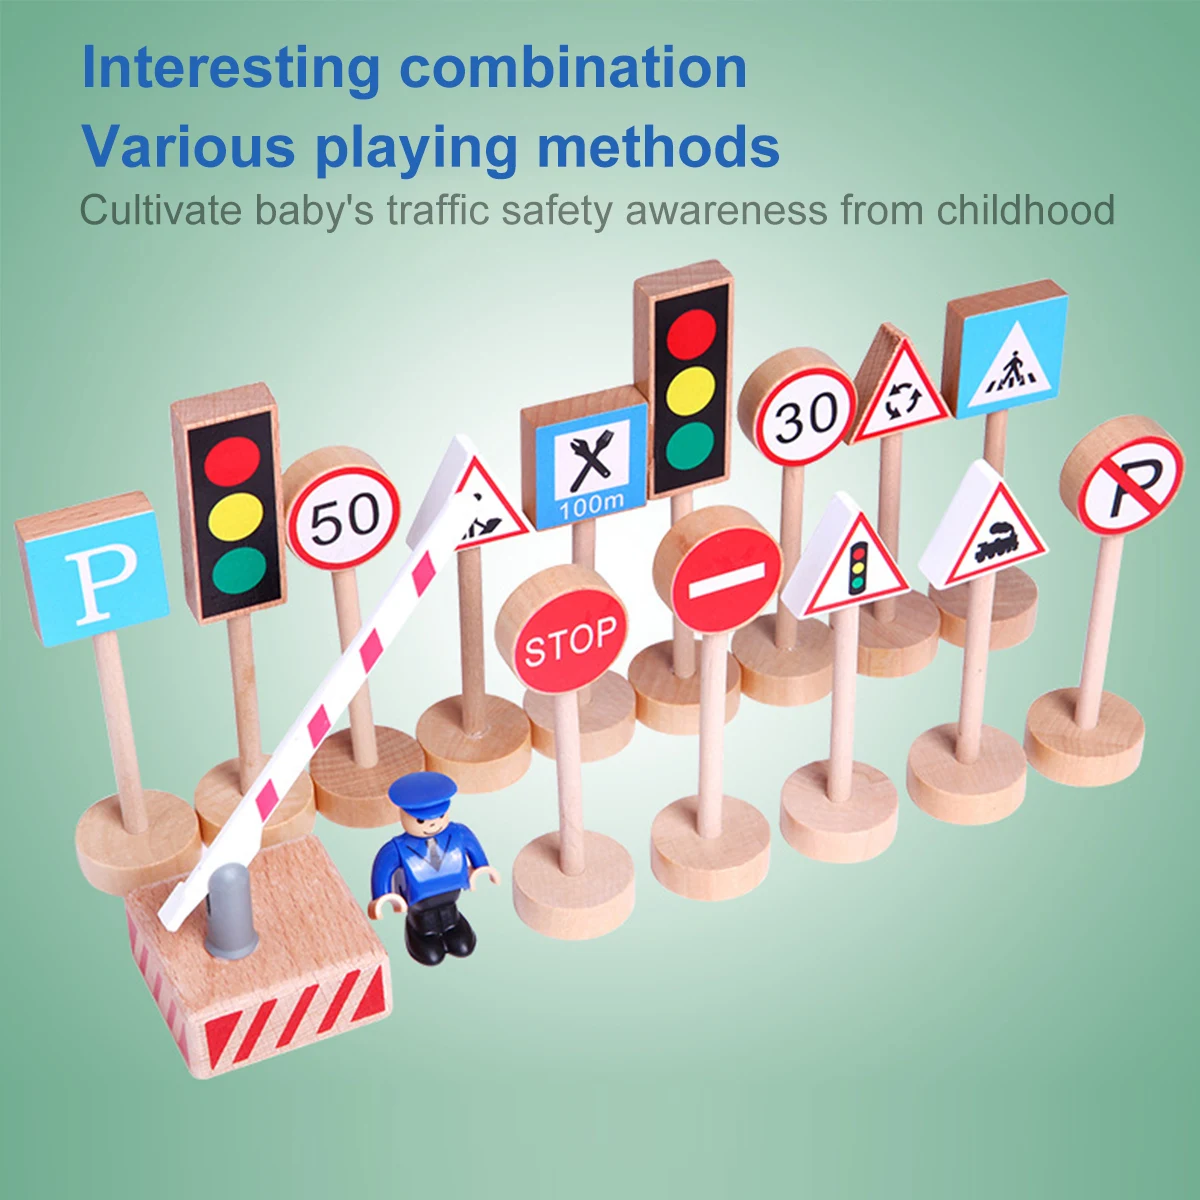 

16pcs Colorful Wooden Street Traffic Signs Parking Scene Street Road Signs Lights Playset Educational Toy for Kids Birthday Gift